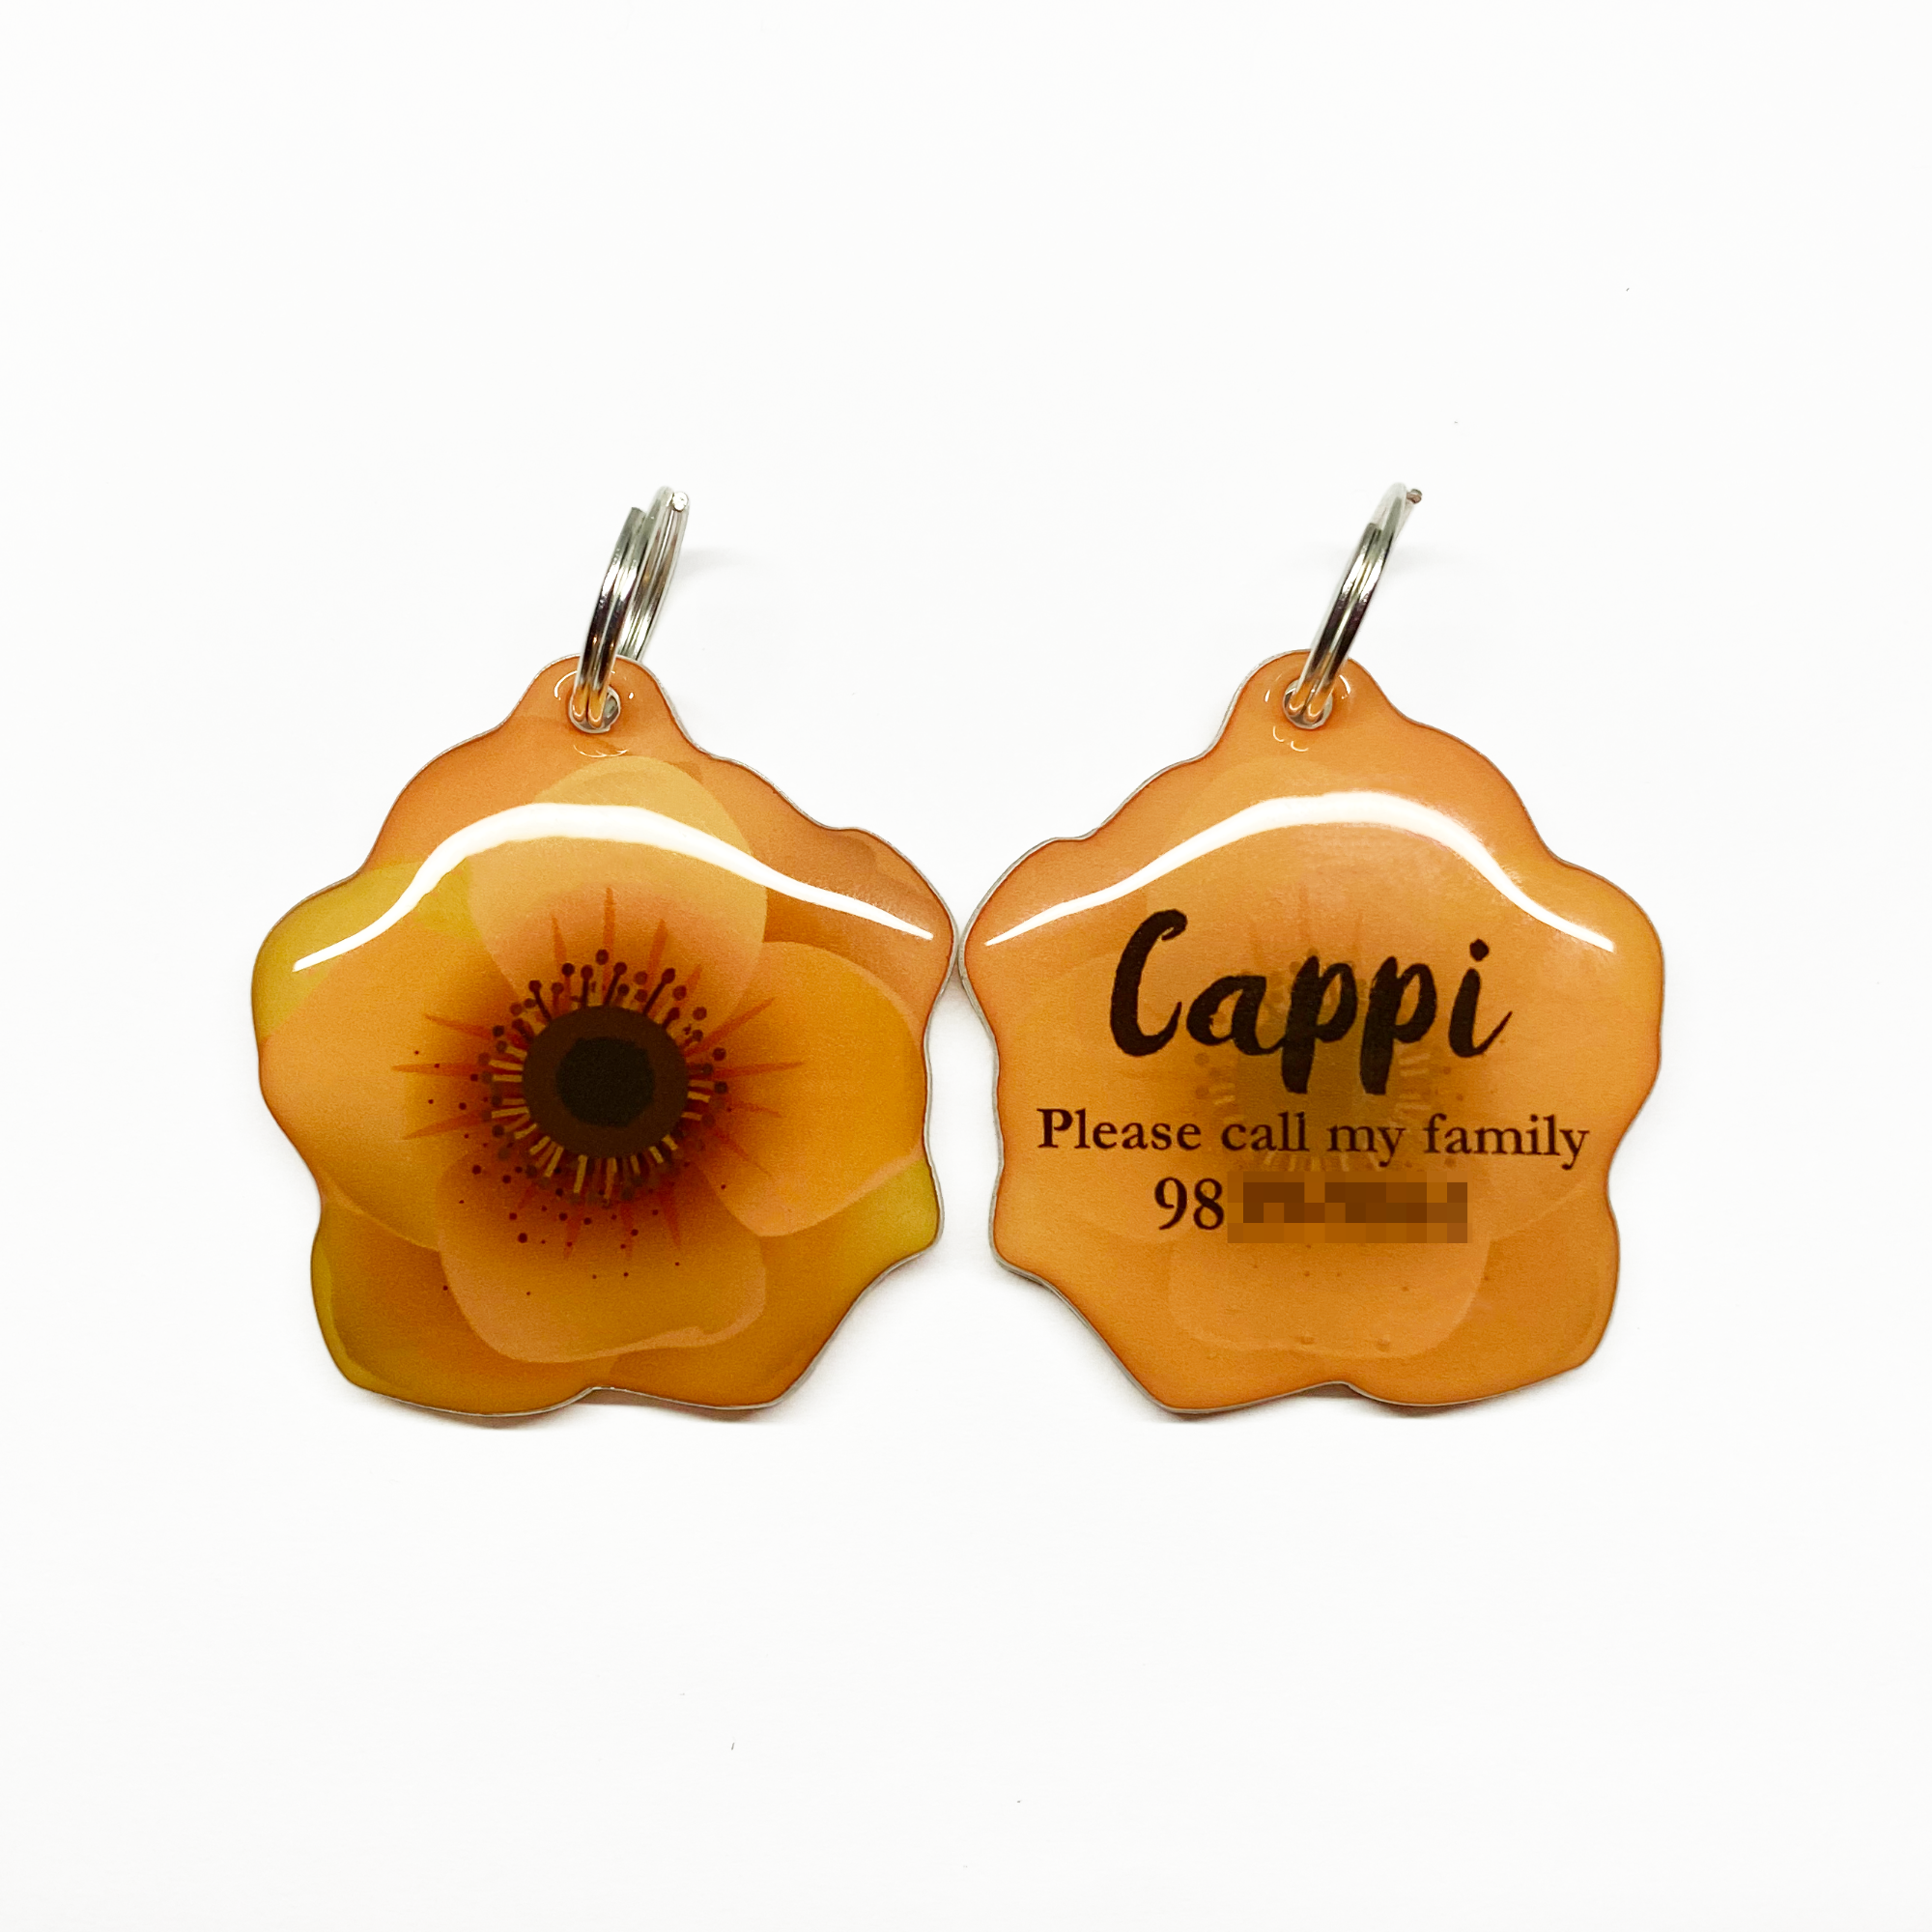 Marigold Hibiscus - 2x Tags Dog Name Tags by Bashtags